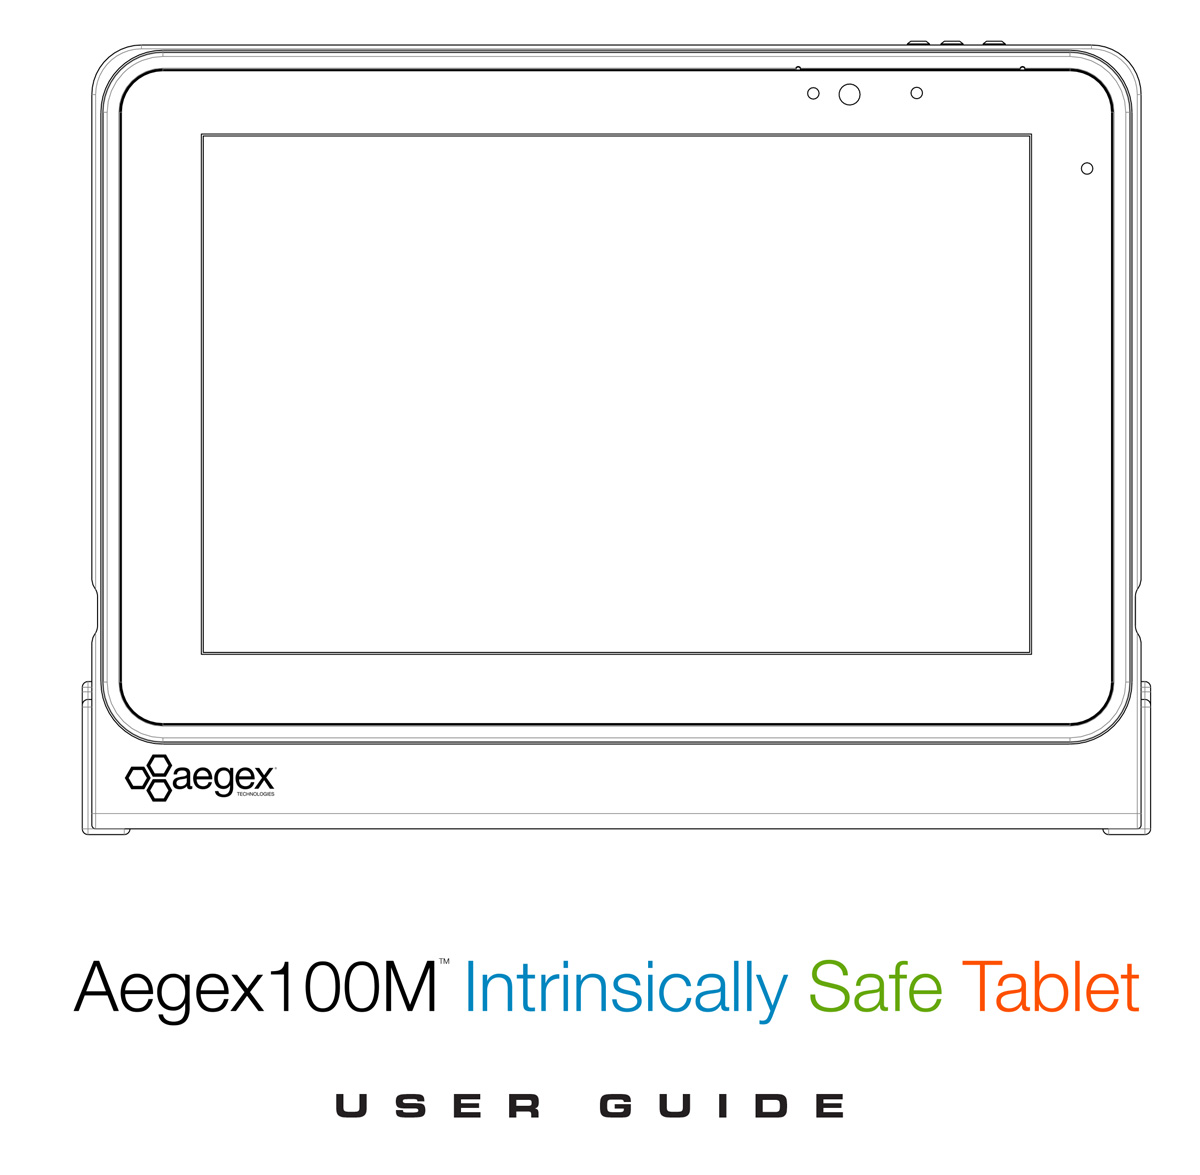 Aegex100M_Intrinsically_Safe_Tablet_User_Guide